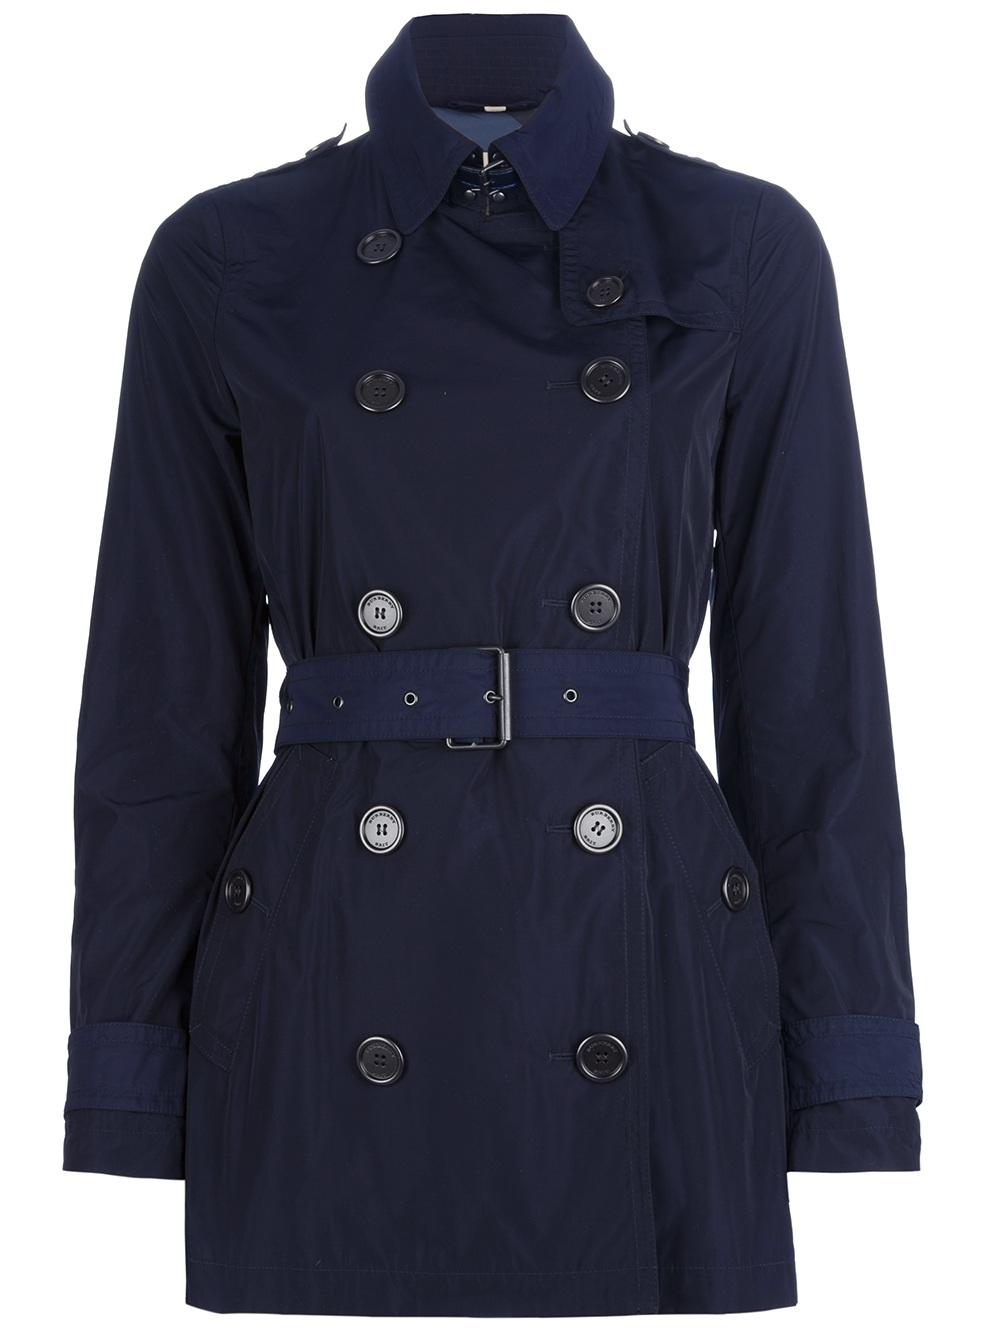 Lyst - Burberry Brit Alcester Trench Coat in Blue